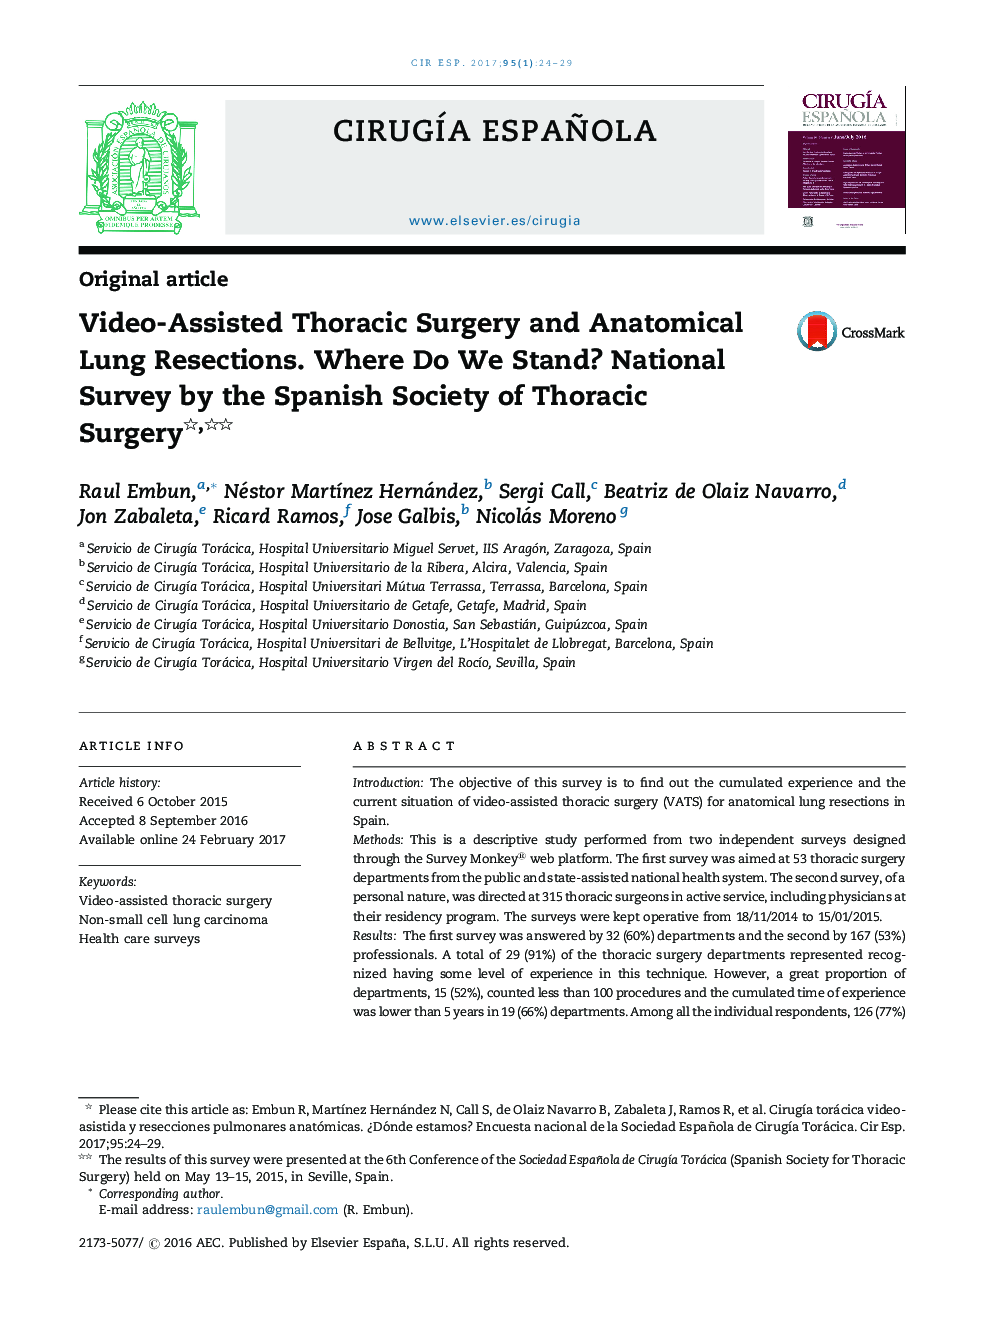 Video-Assisted Thoracic Surgery and Anatomical Lung Resections. Where Do We Stand? National Survey by the Spanish Society of Thoracic Surgery